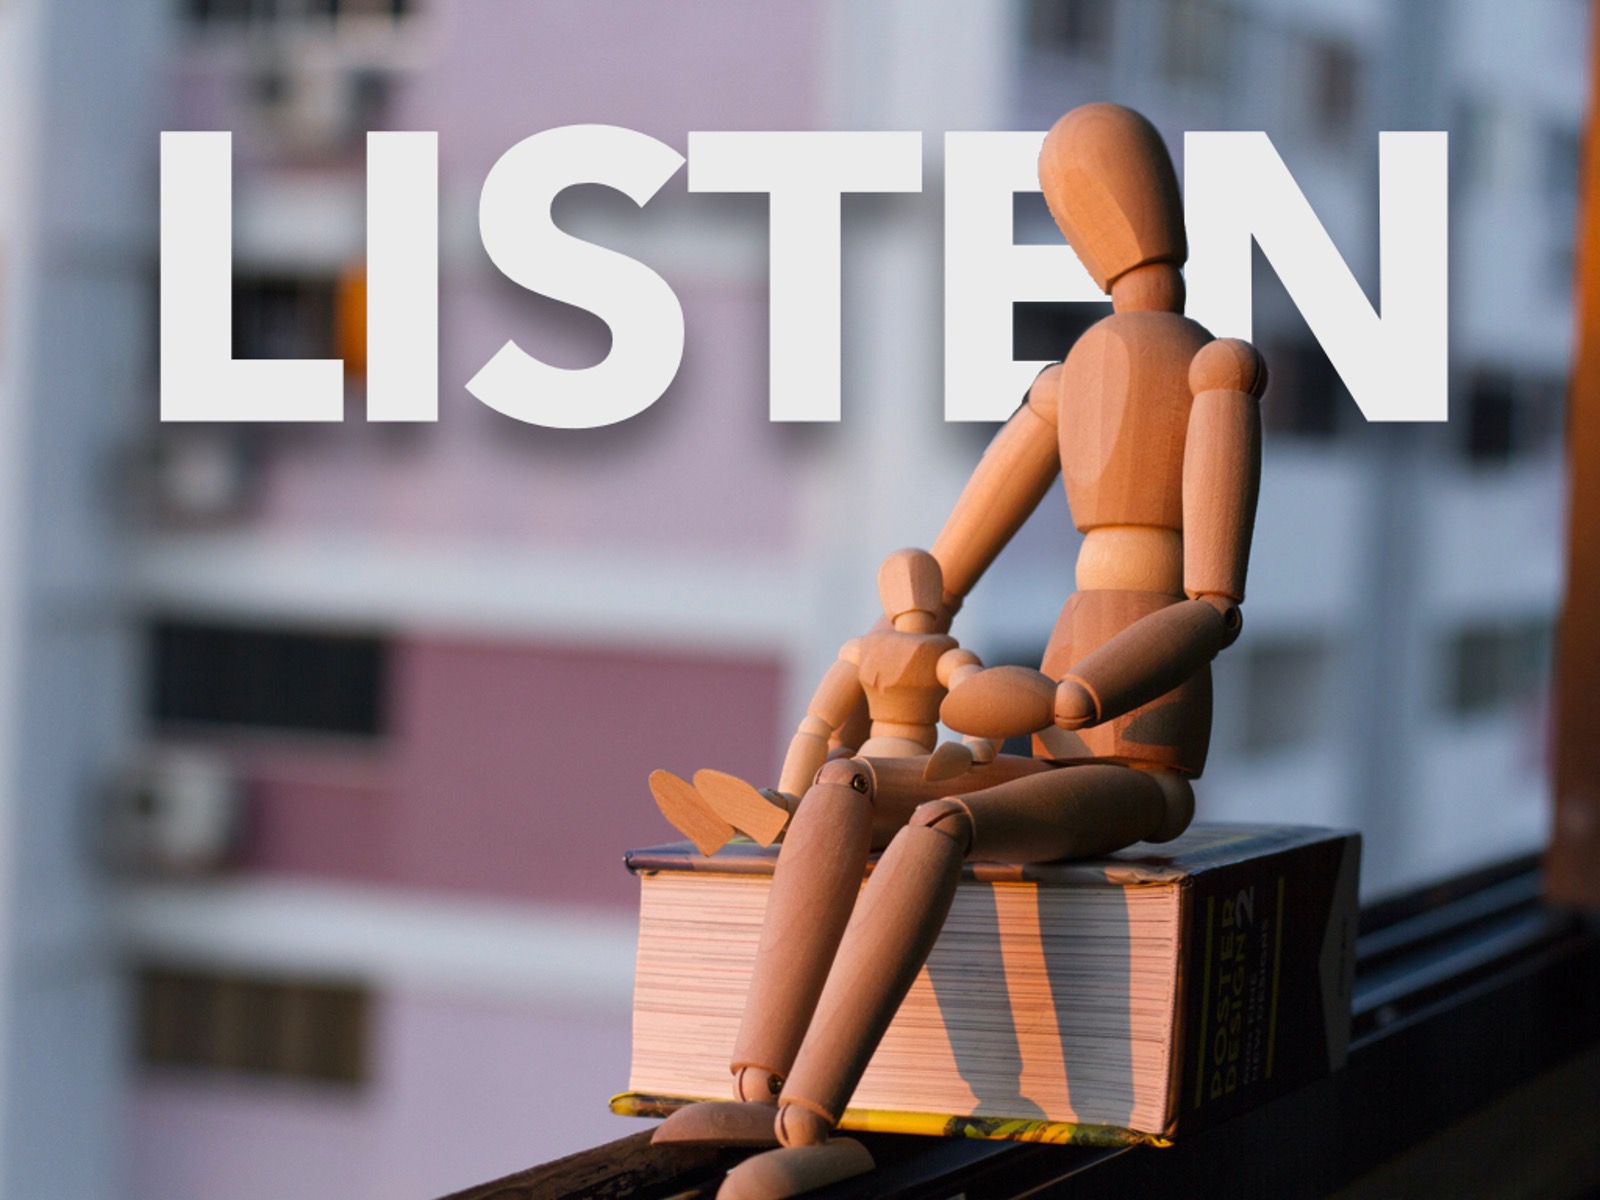 wooden dolls sitting in front of the word listen